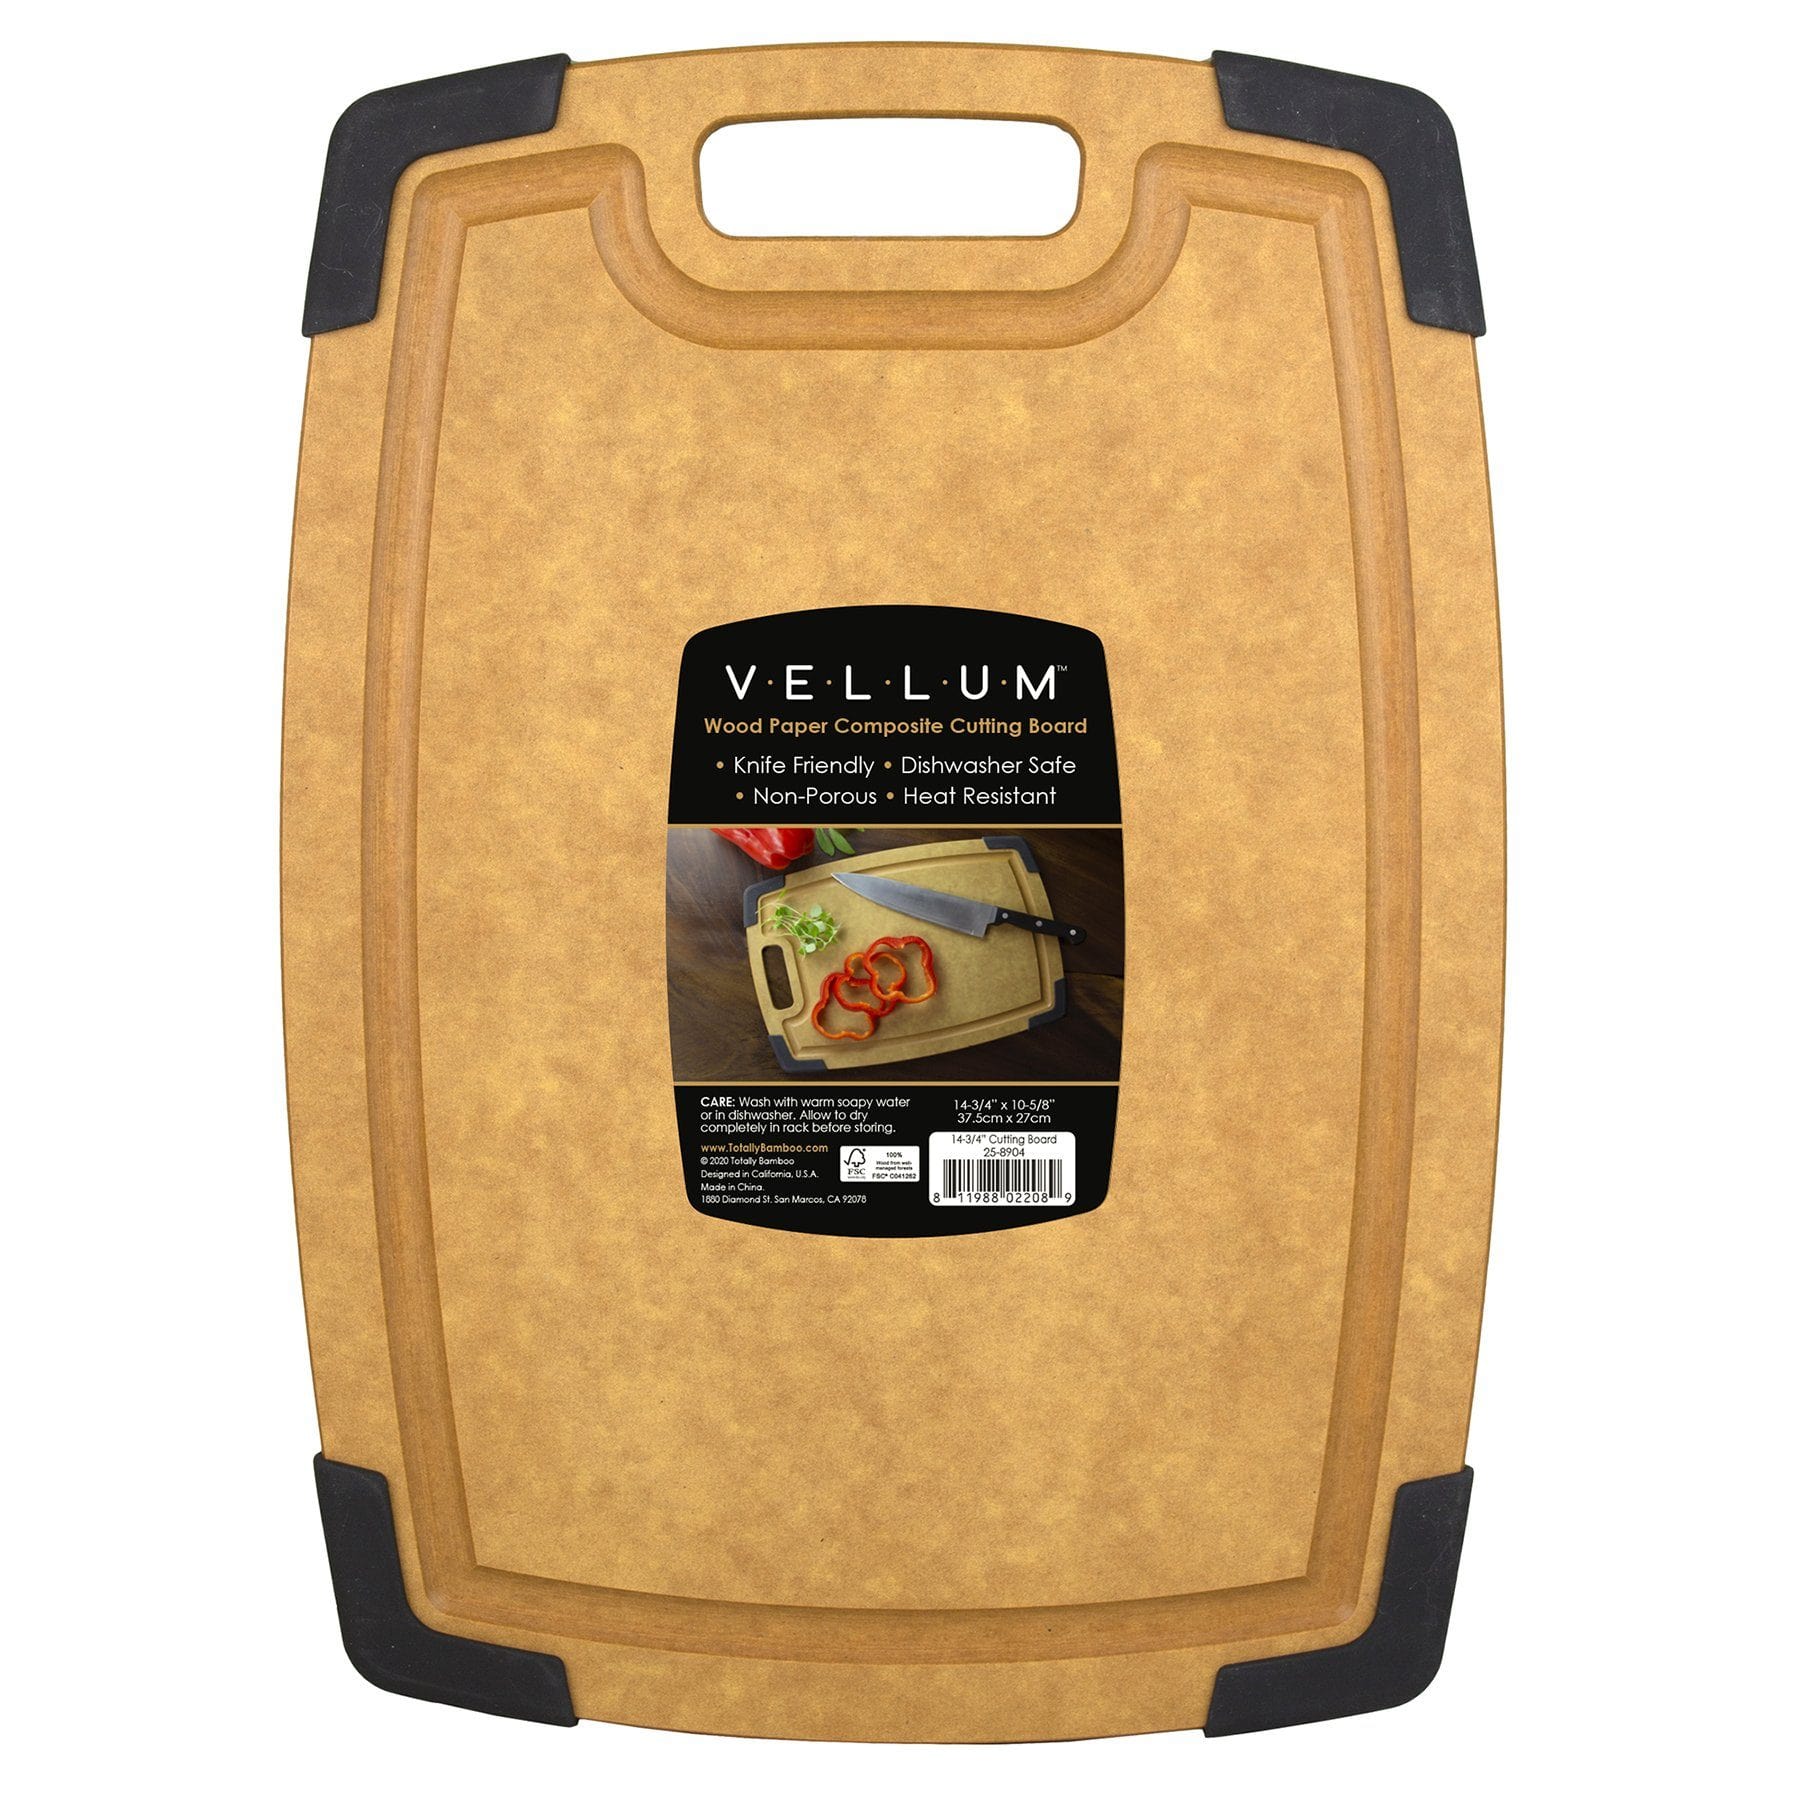 Totally Bamboo Vellum™ Wood Paper Composite Cutting Board with Juice Groove, 14-3/4" x 10-5/8" | Dishwasher Safe | Non-Skid